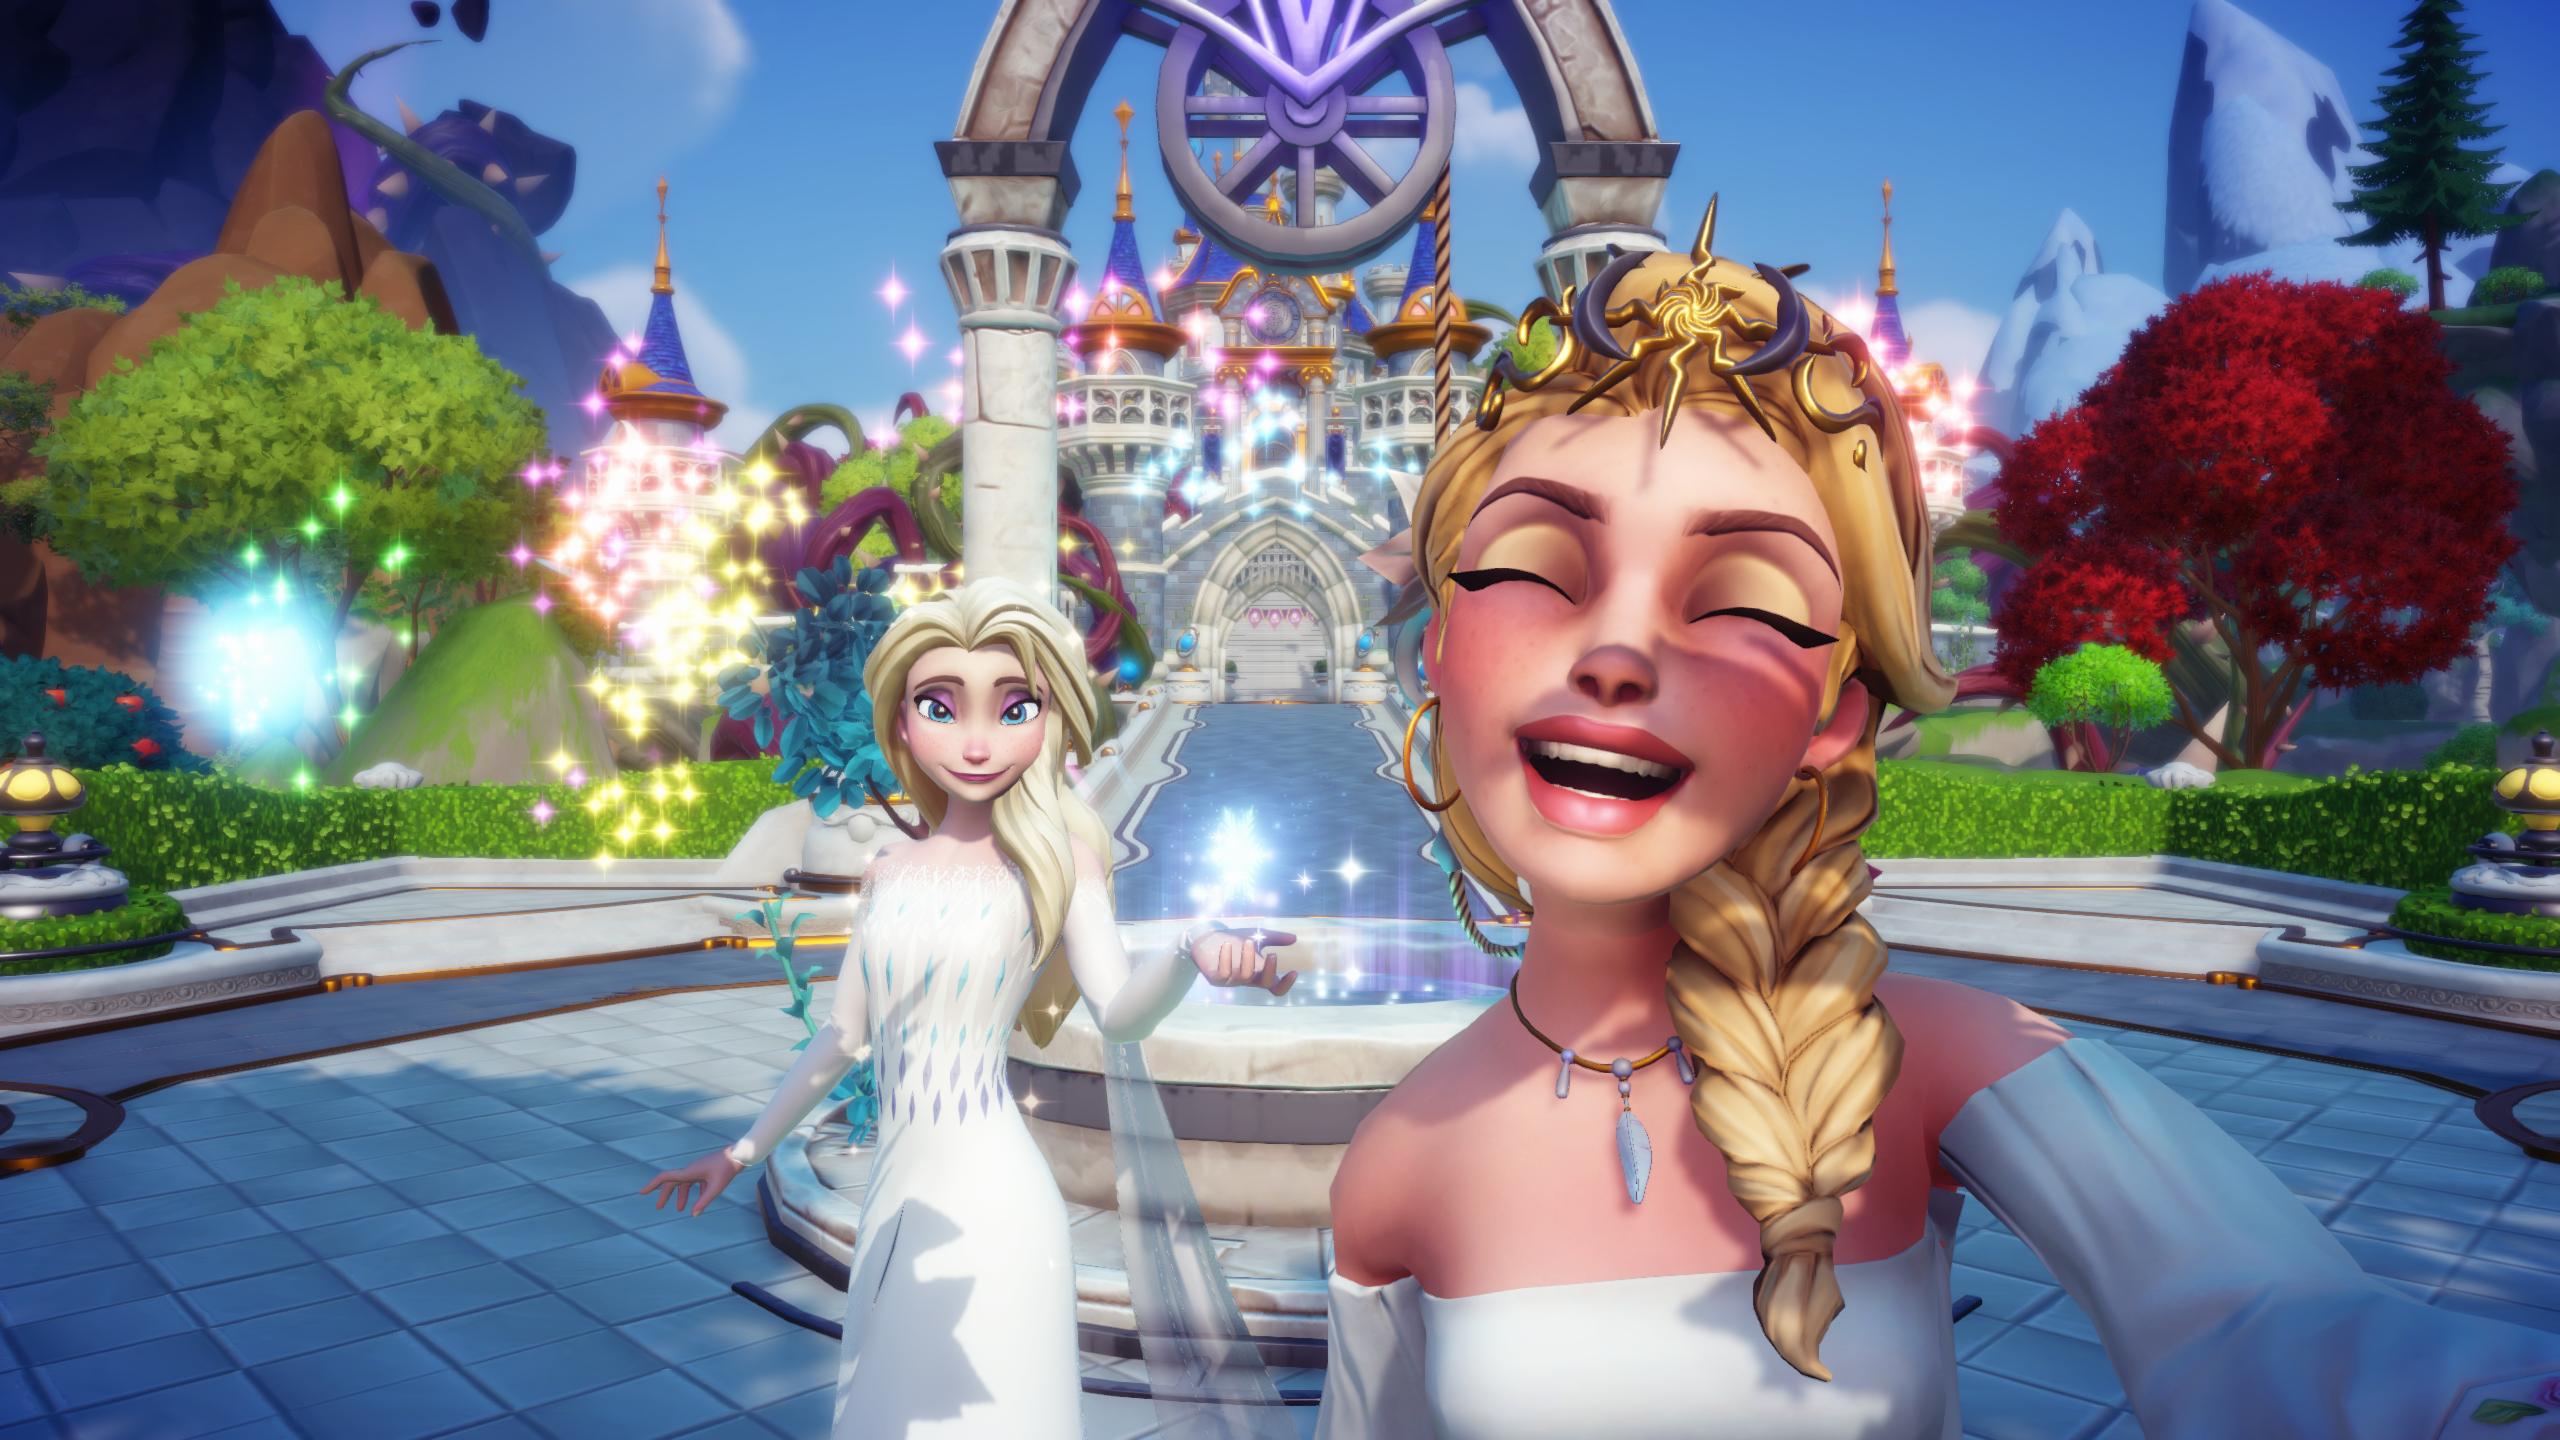 Disney Dreamlight Valley is getting multiplayer this year